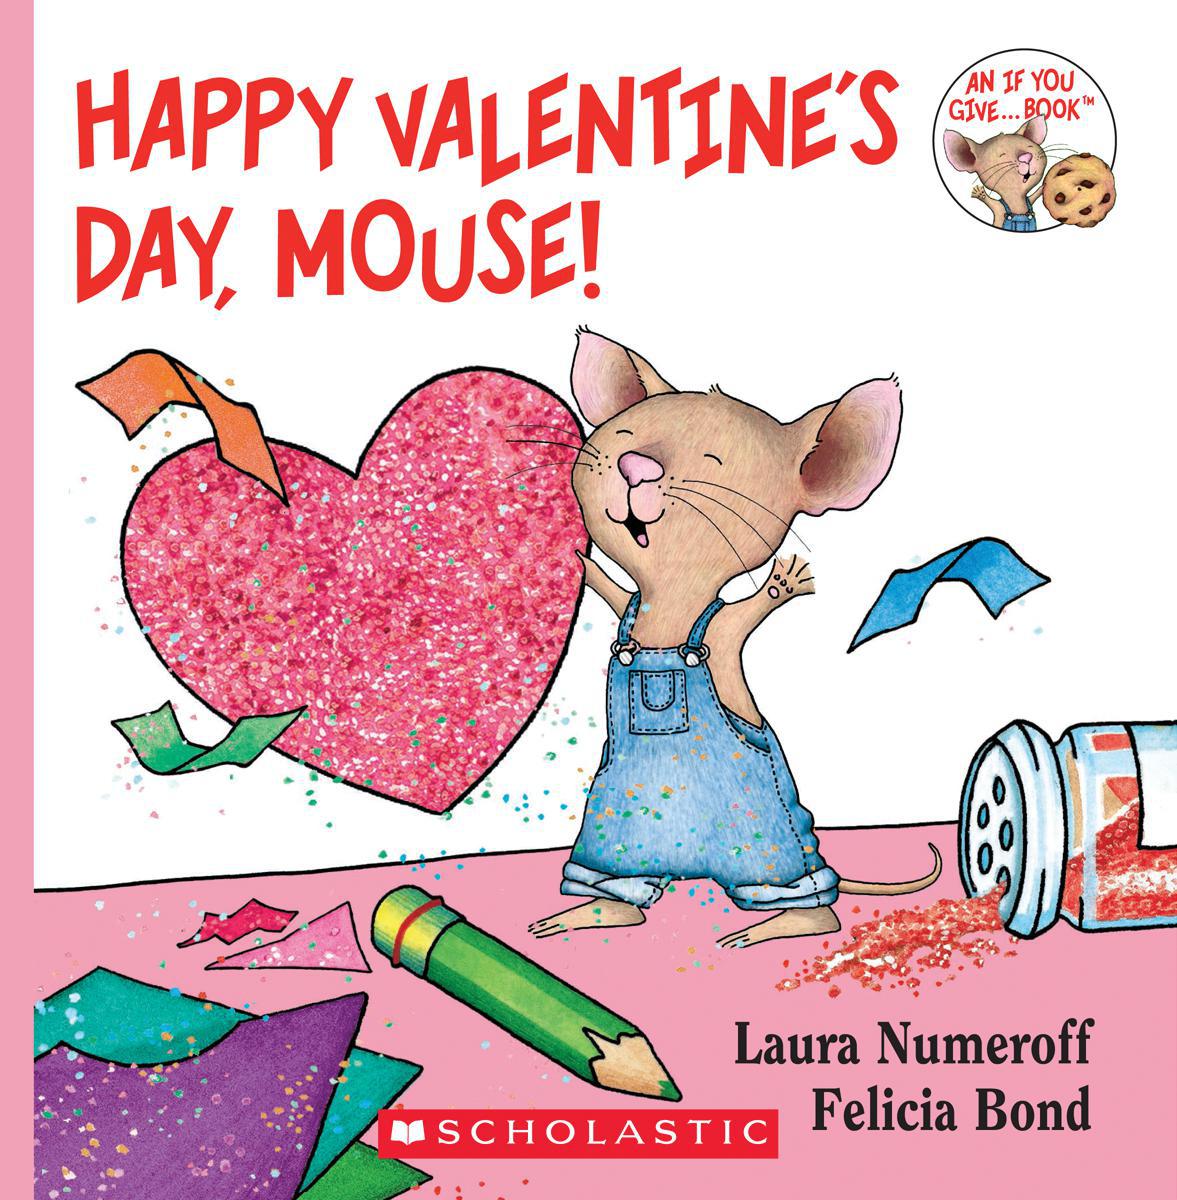  Happy Valentine's Day, Mouse! 